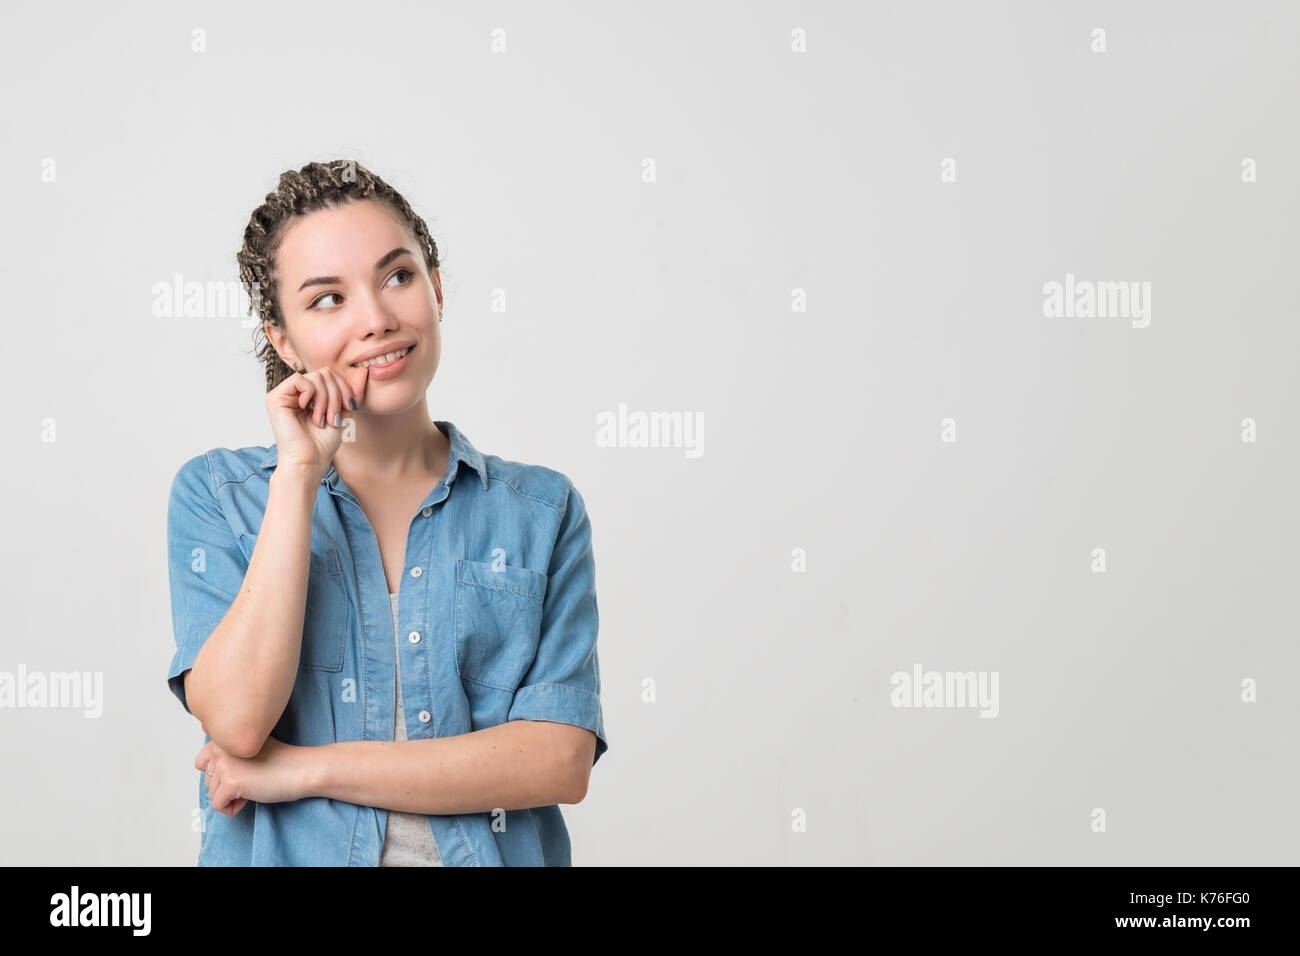 Laughing caucasian woman with braids hairstyle and good sense of humor smiling dreamly Stock Photo